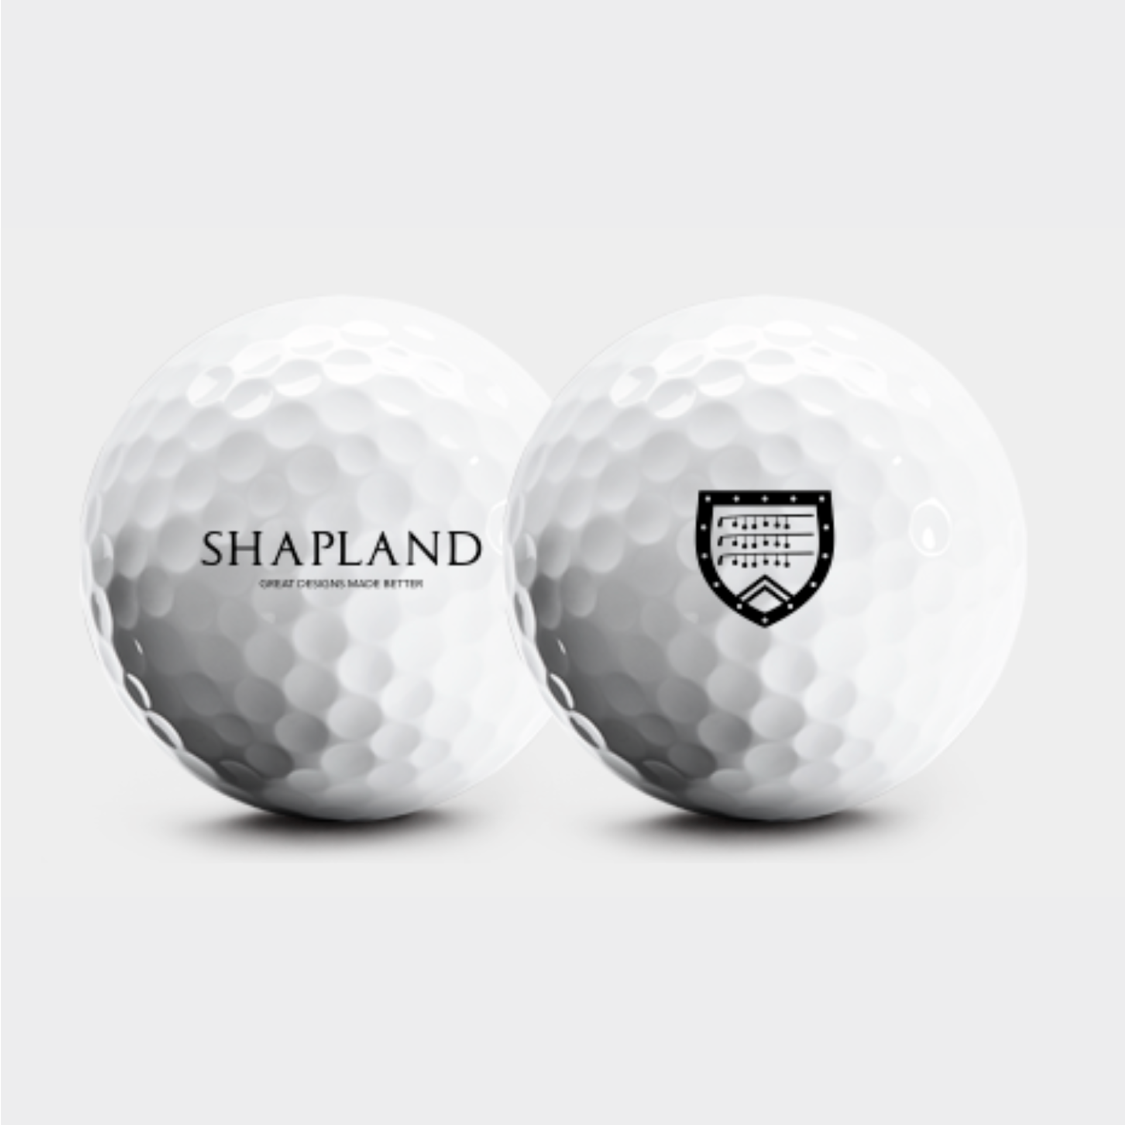 Shapland logo golf balls by Snell